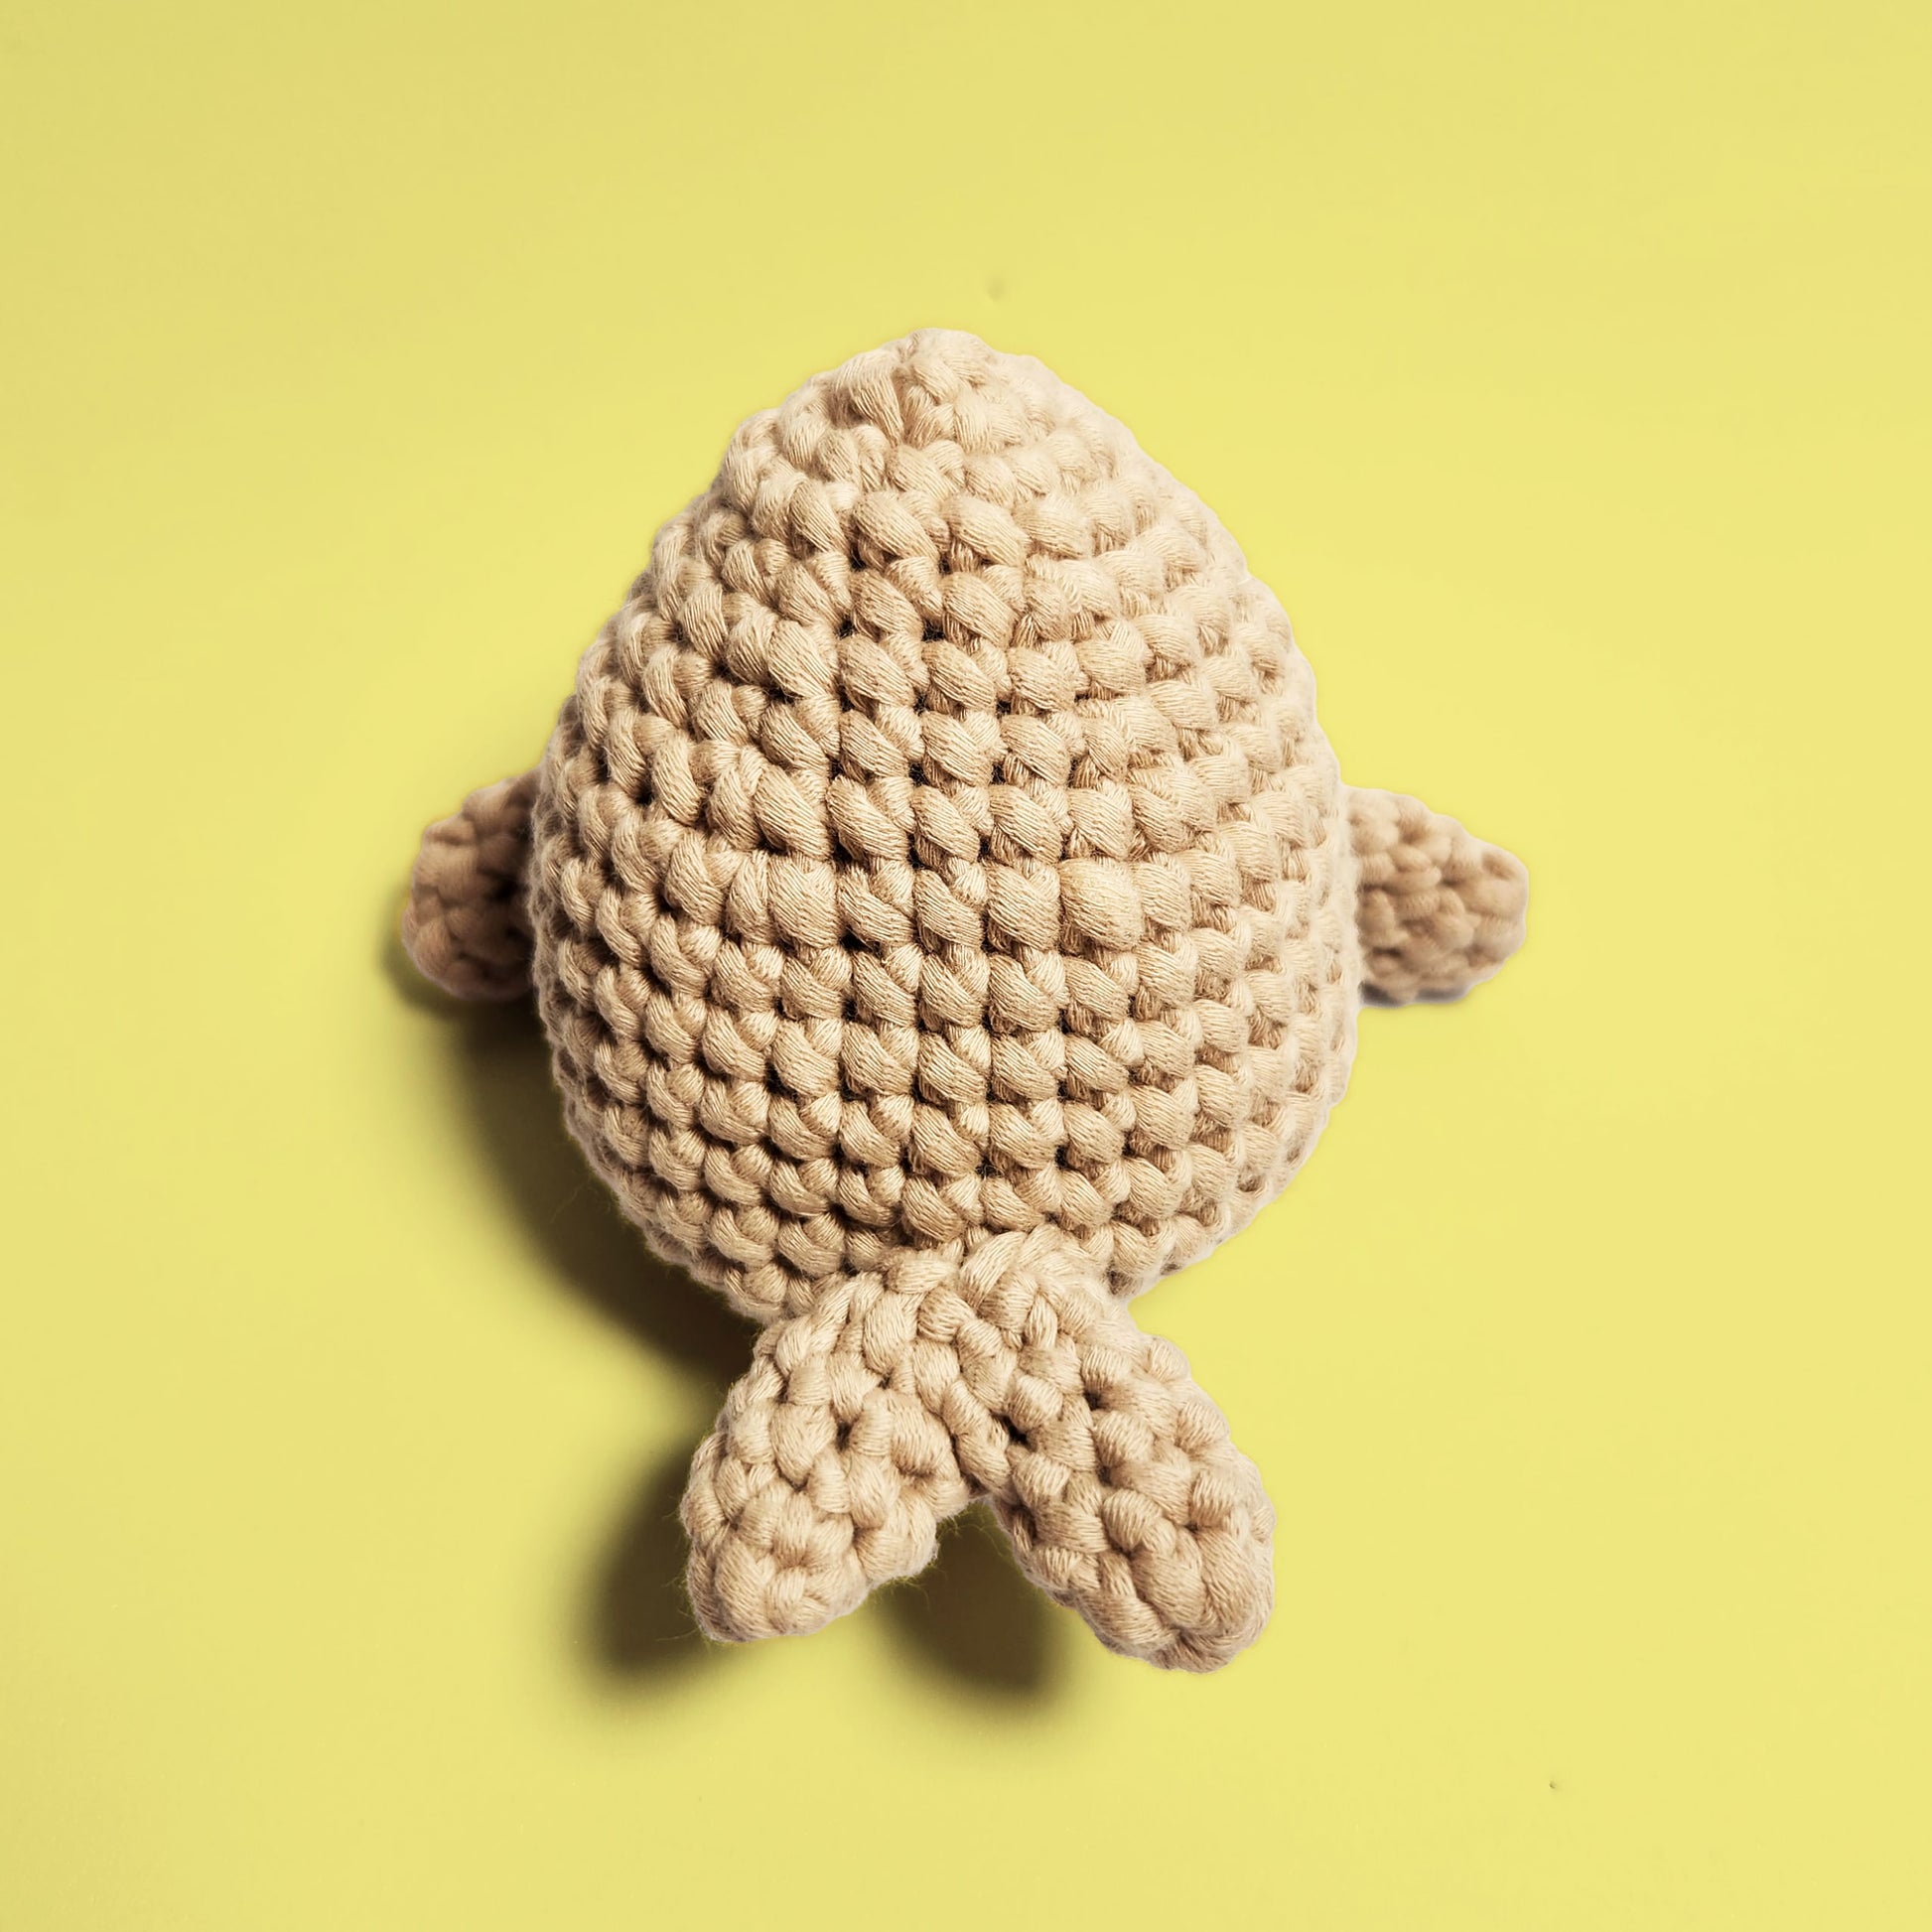 Brown seal crochet amigurumi, crafted using our beginner friendly crochet kit. This adorable seal features a realistic brown hue, perfect for animal lovers and crochet enthusiasts. Back view.